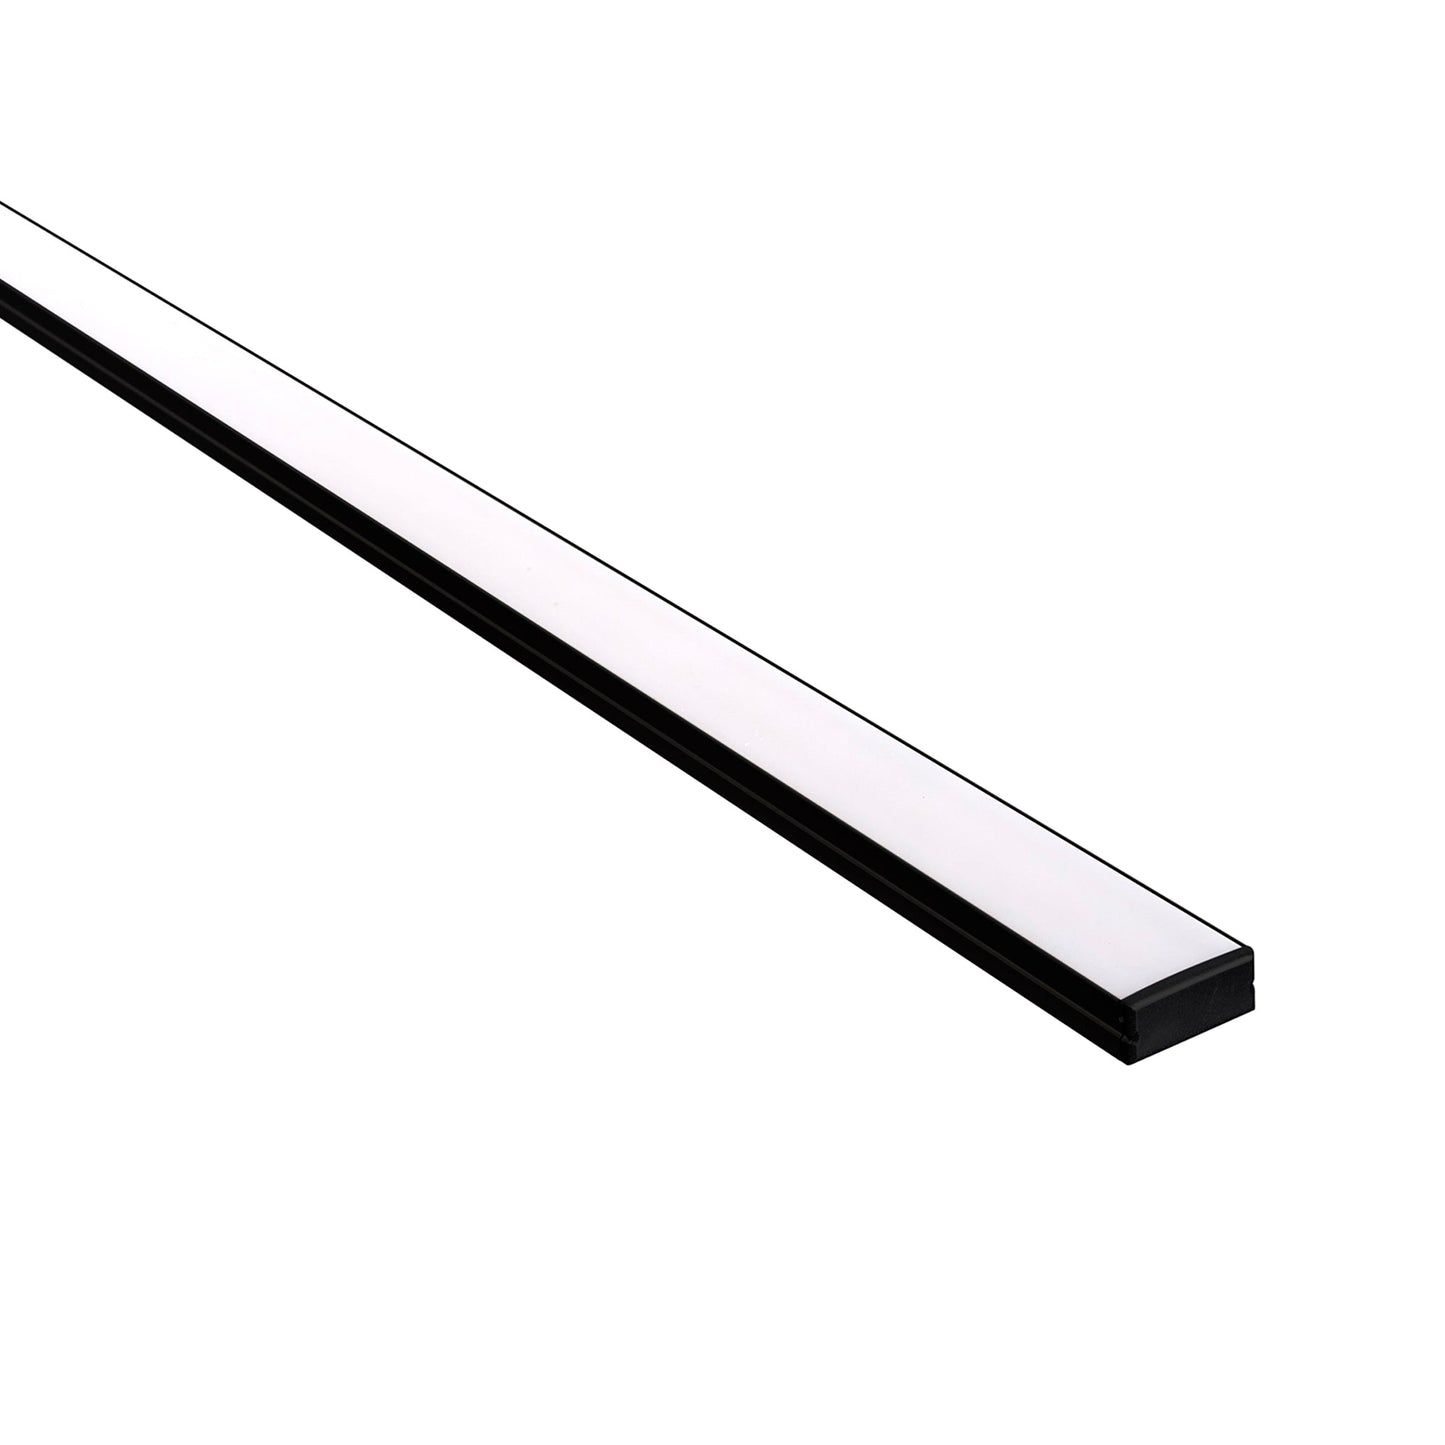 Shallow Black Square Aluminium Profile with Standard Diffuser per metre Supplied with 2x mounting clips per metre + 2x end caps per length 